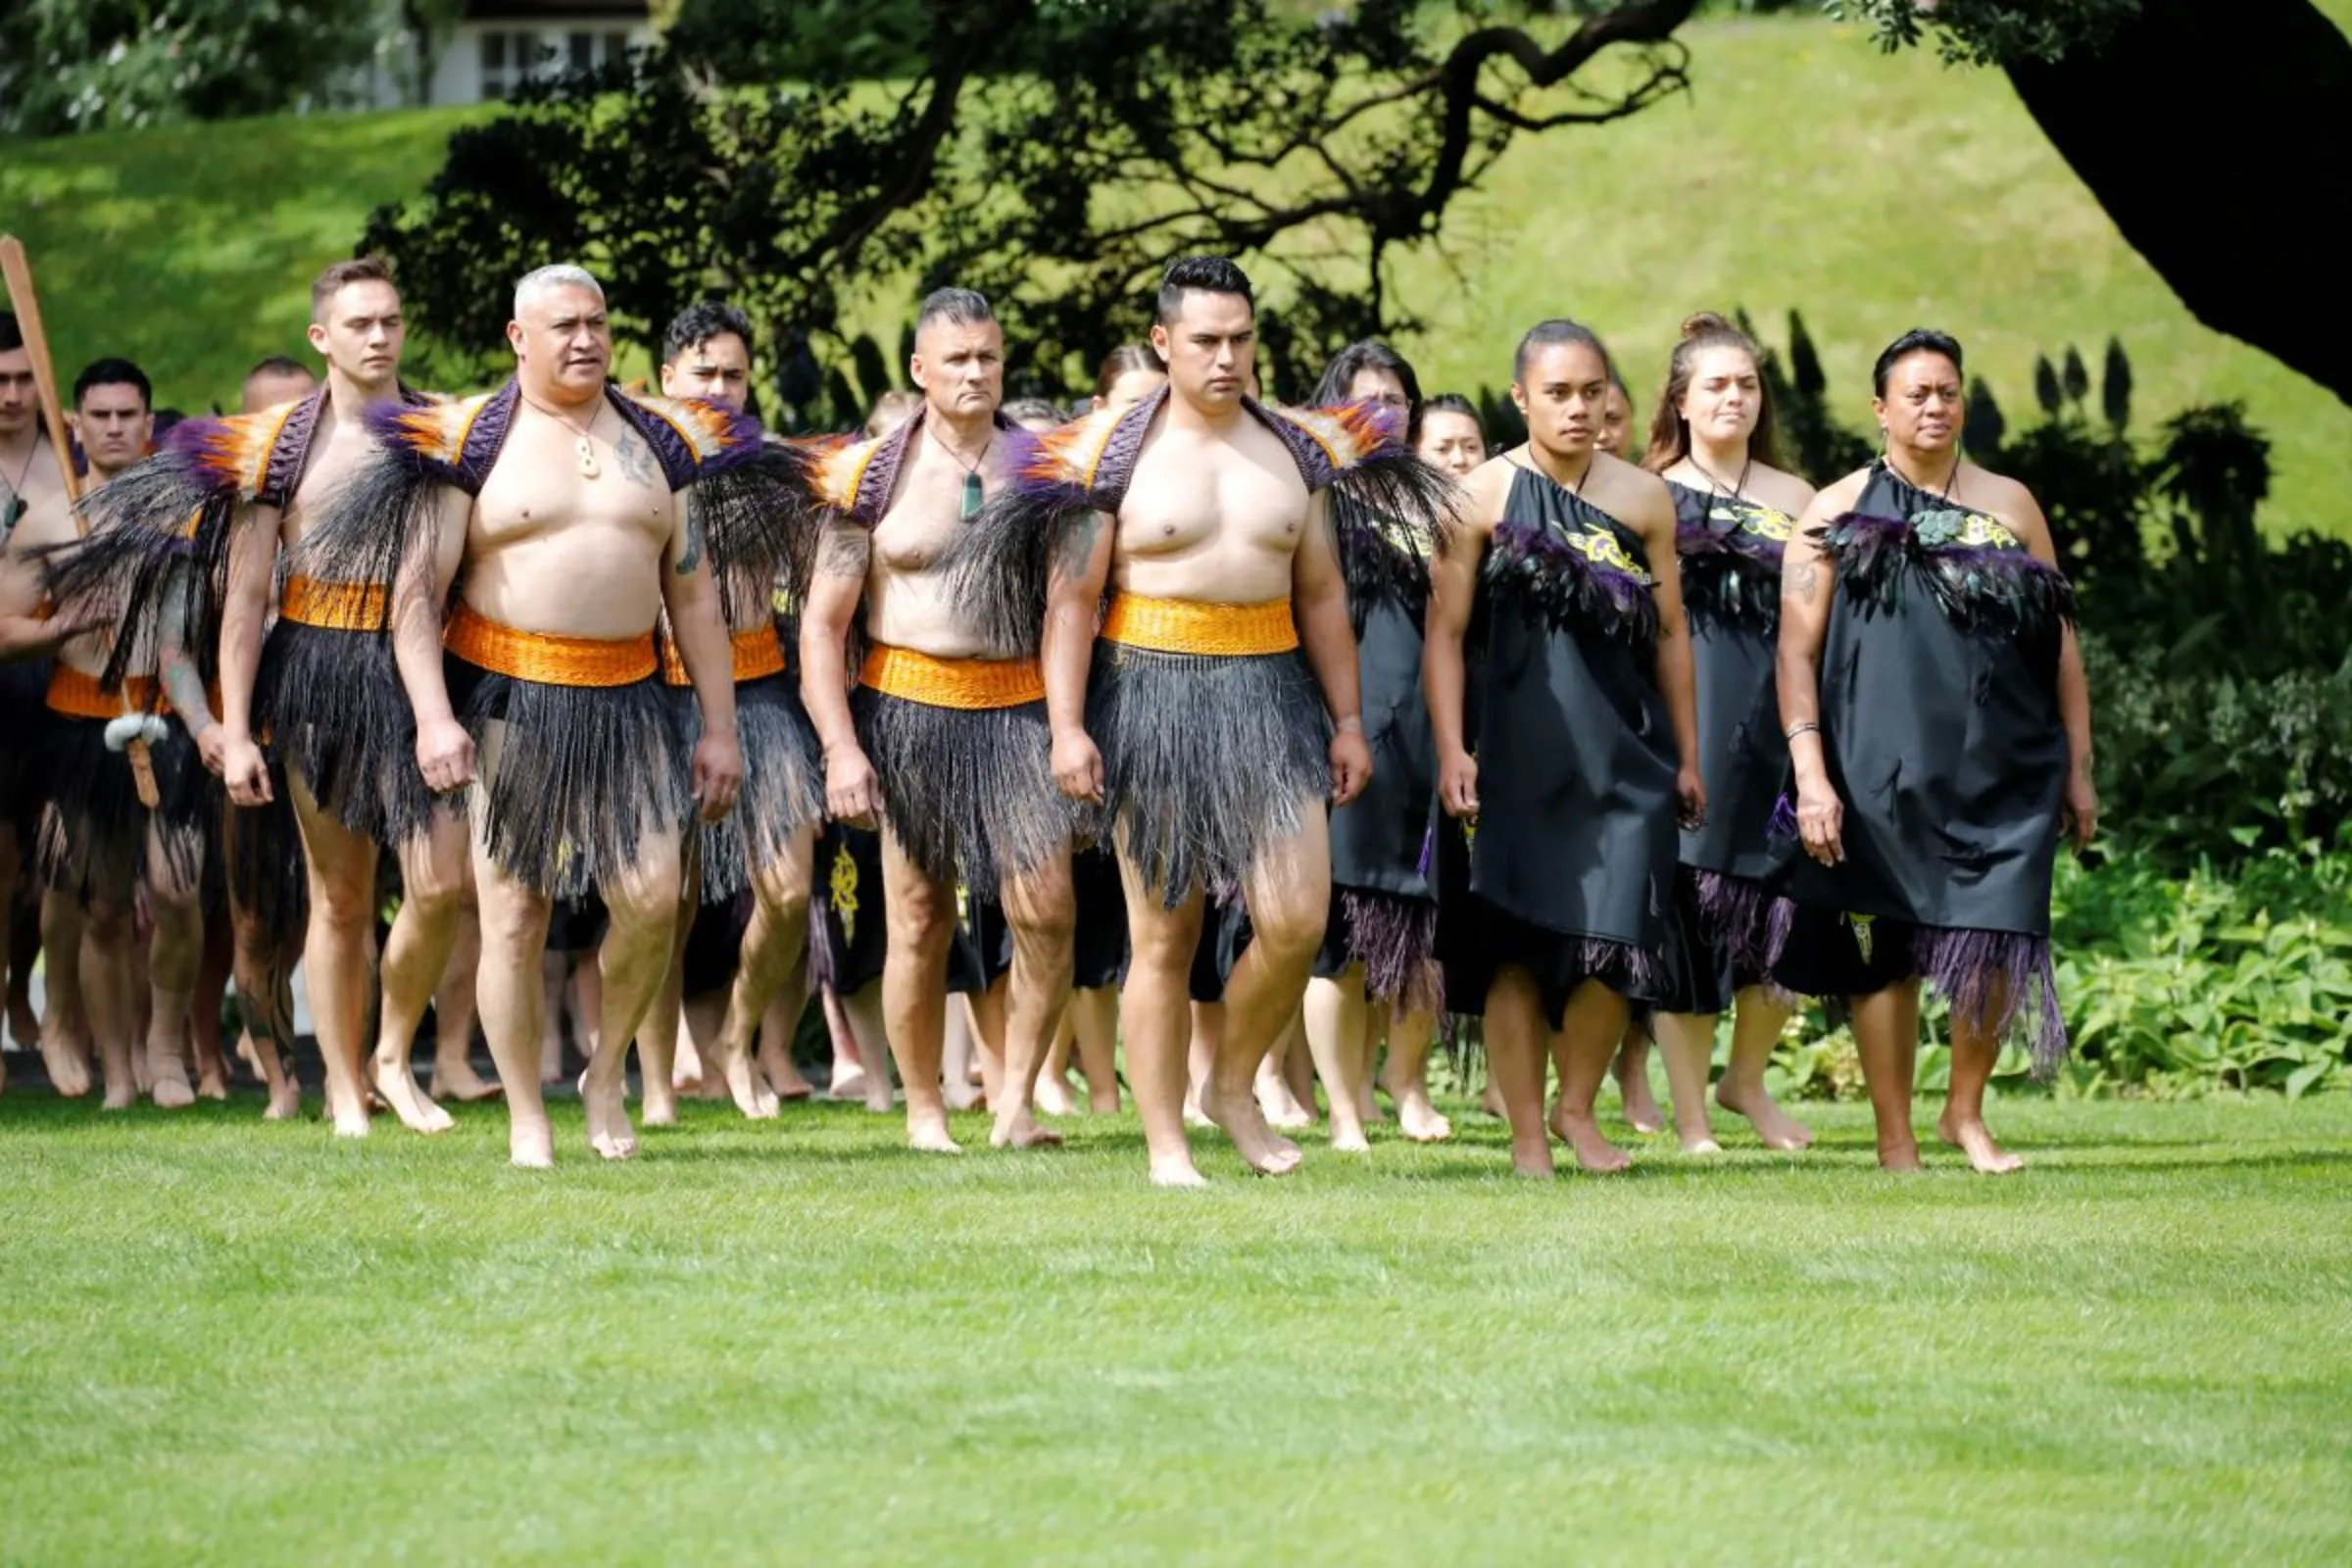 Maori warriors arrive ahead of a welcome ceremony in Wellington, New Zealand, October 28, 2018. REUTERS/Phil Noble